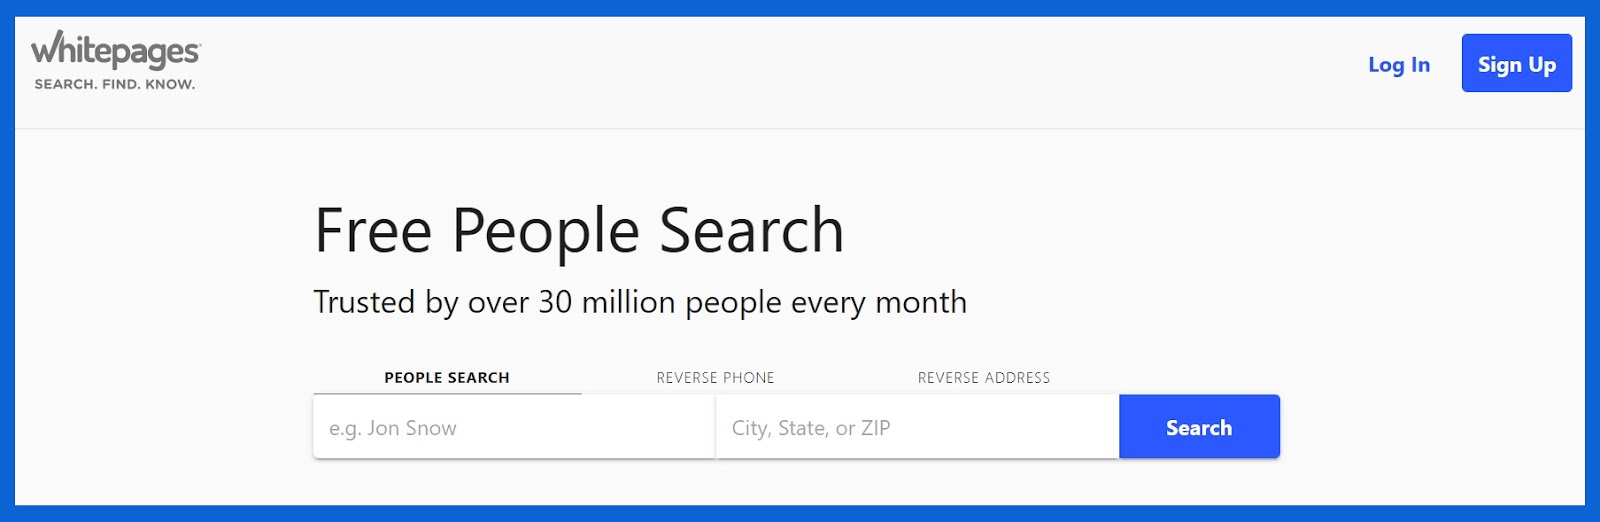 do-people-know-when-you-search-them-up-on-whitepages